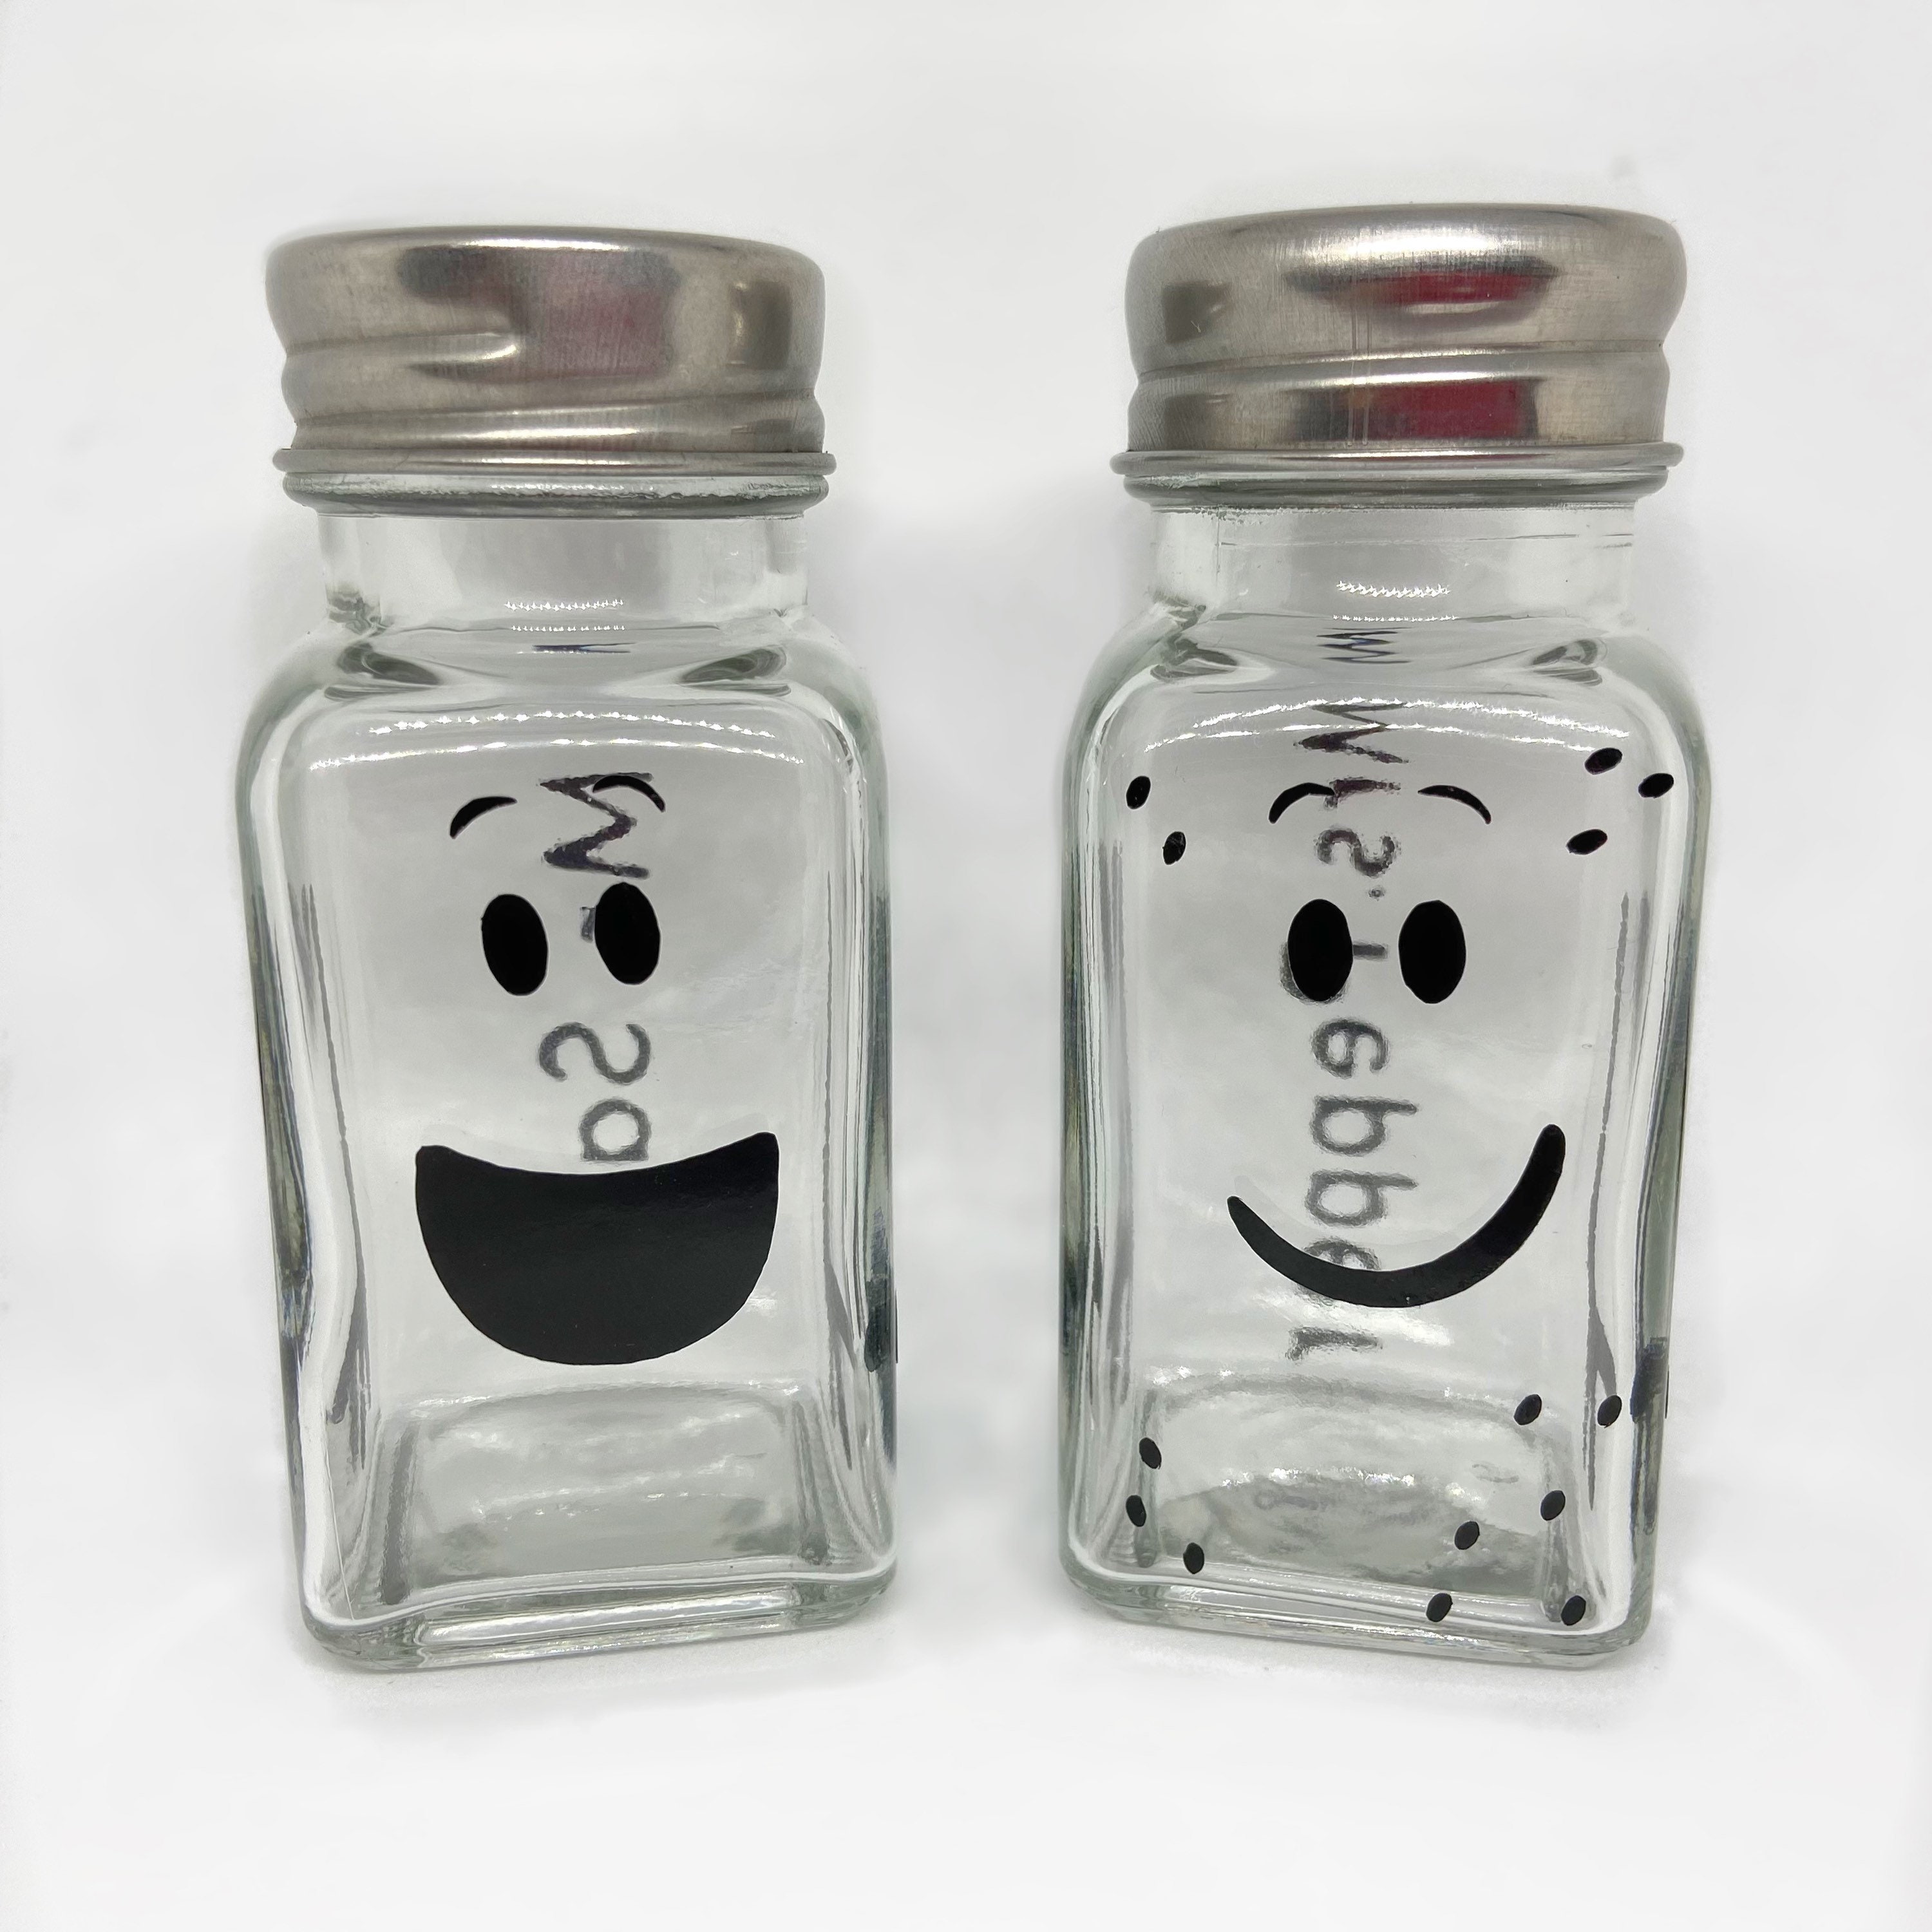 Our exclusive Blues Clues Mr. Salt & Mrs. Pepper shakers are back in s